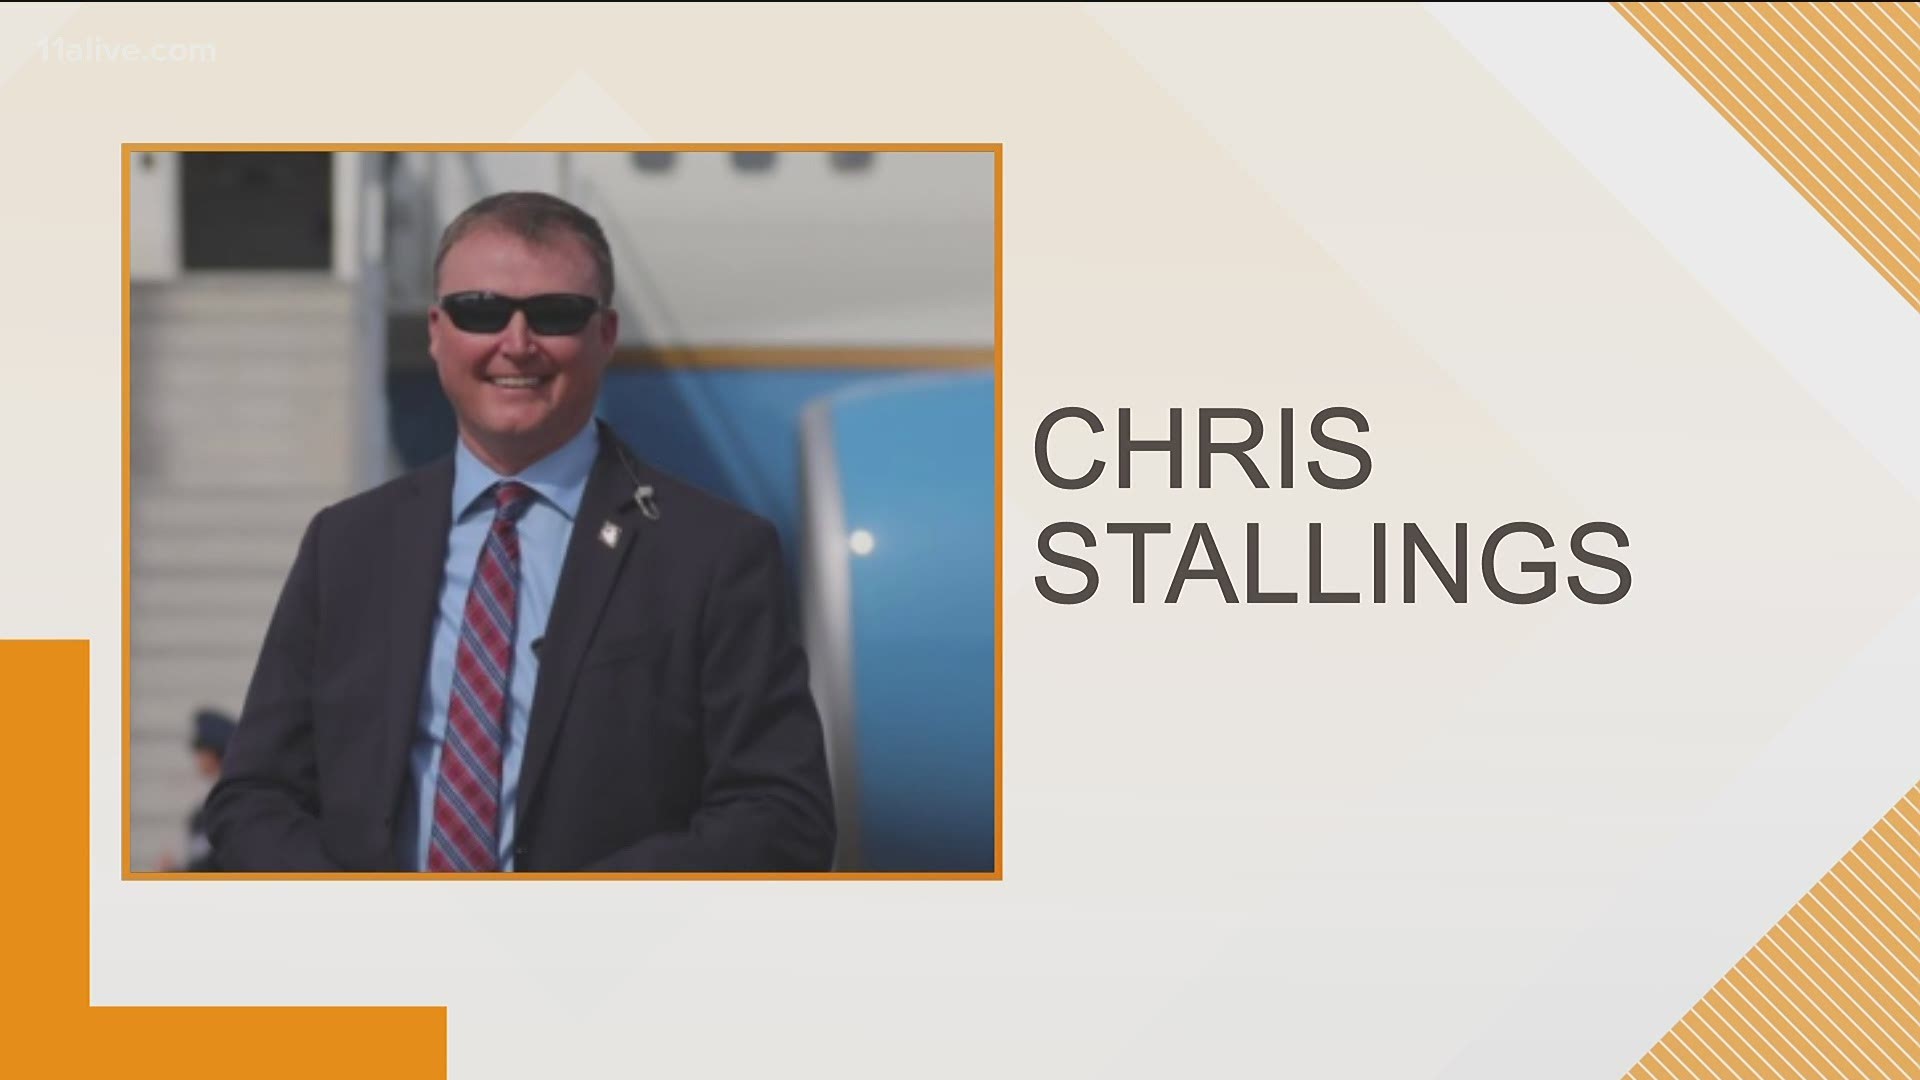 Chris Stallings was named as the former director.